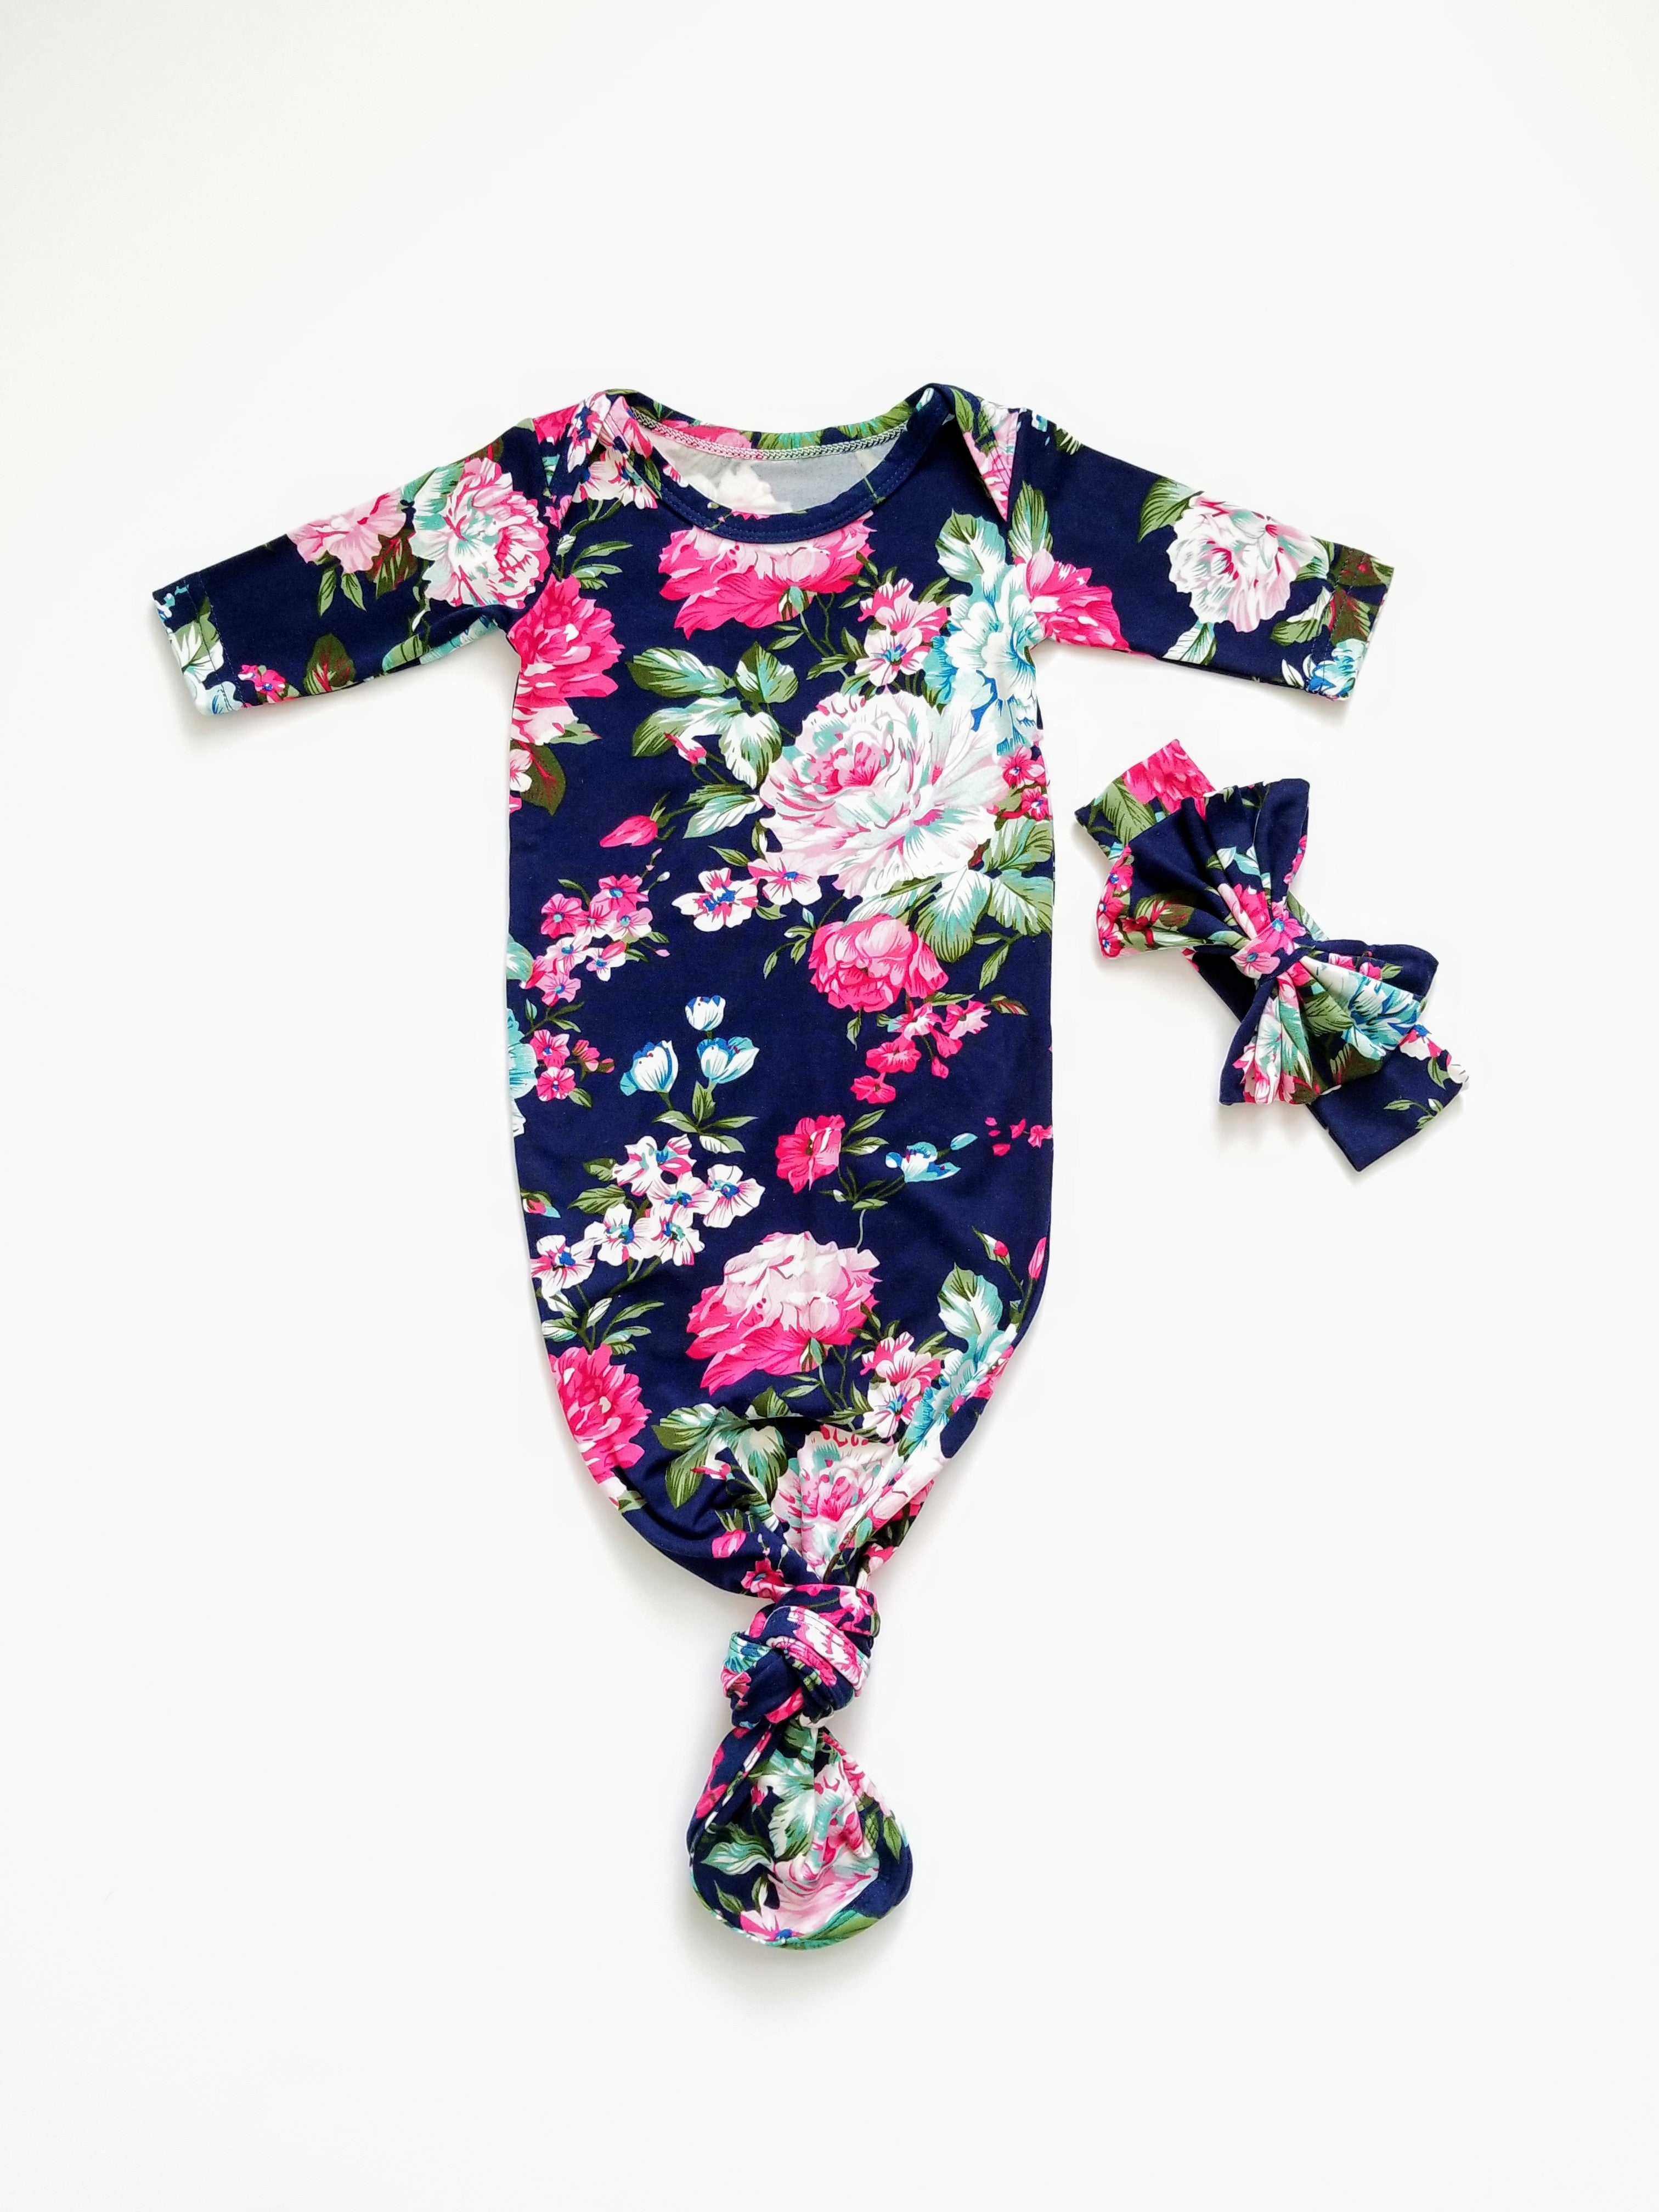 floral outfit for baby girl